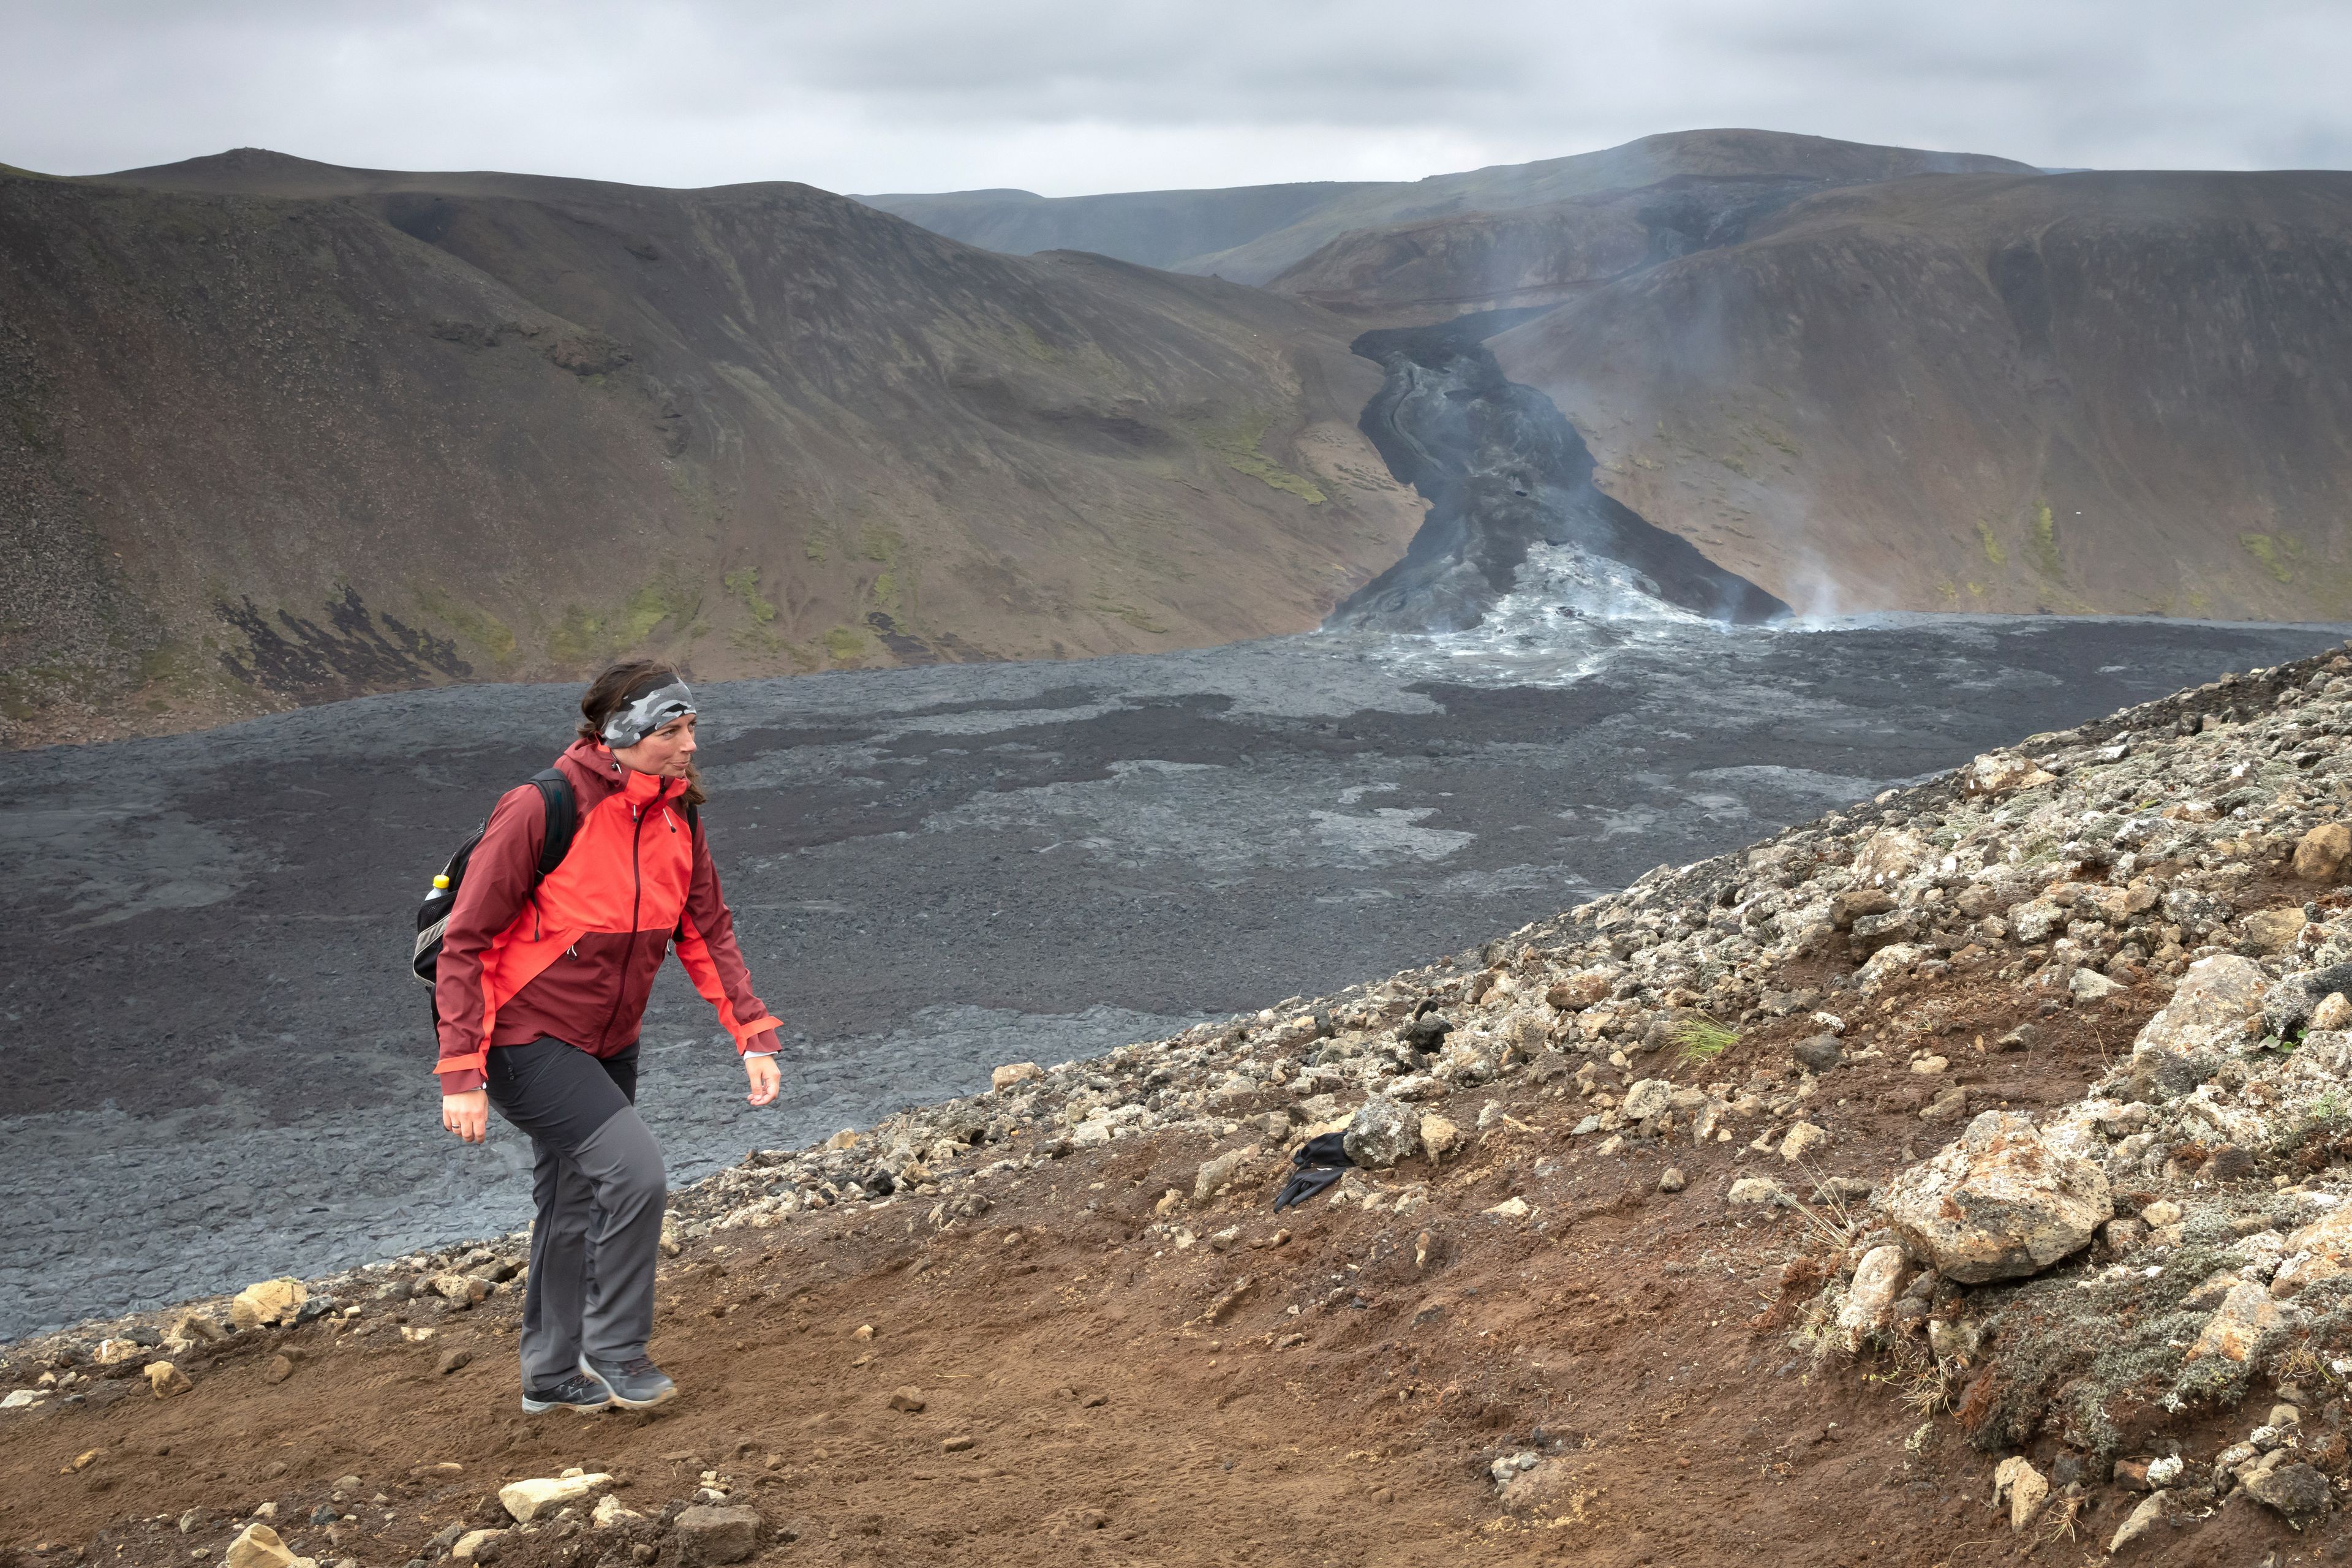 A view of a hiking path in Iceland with volcanic activity in the background